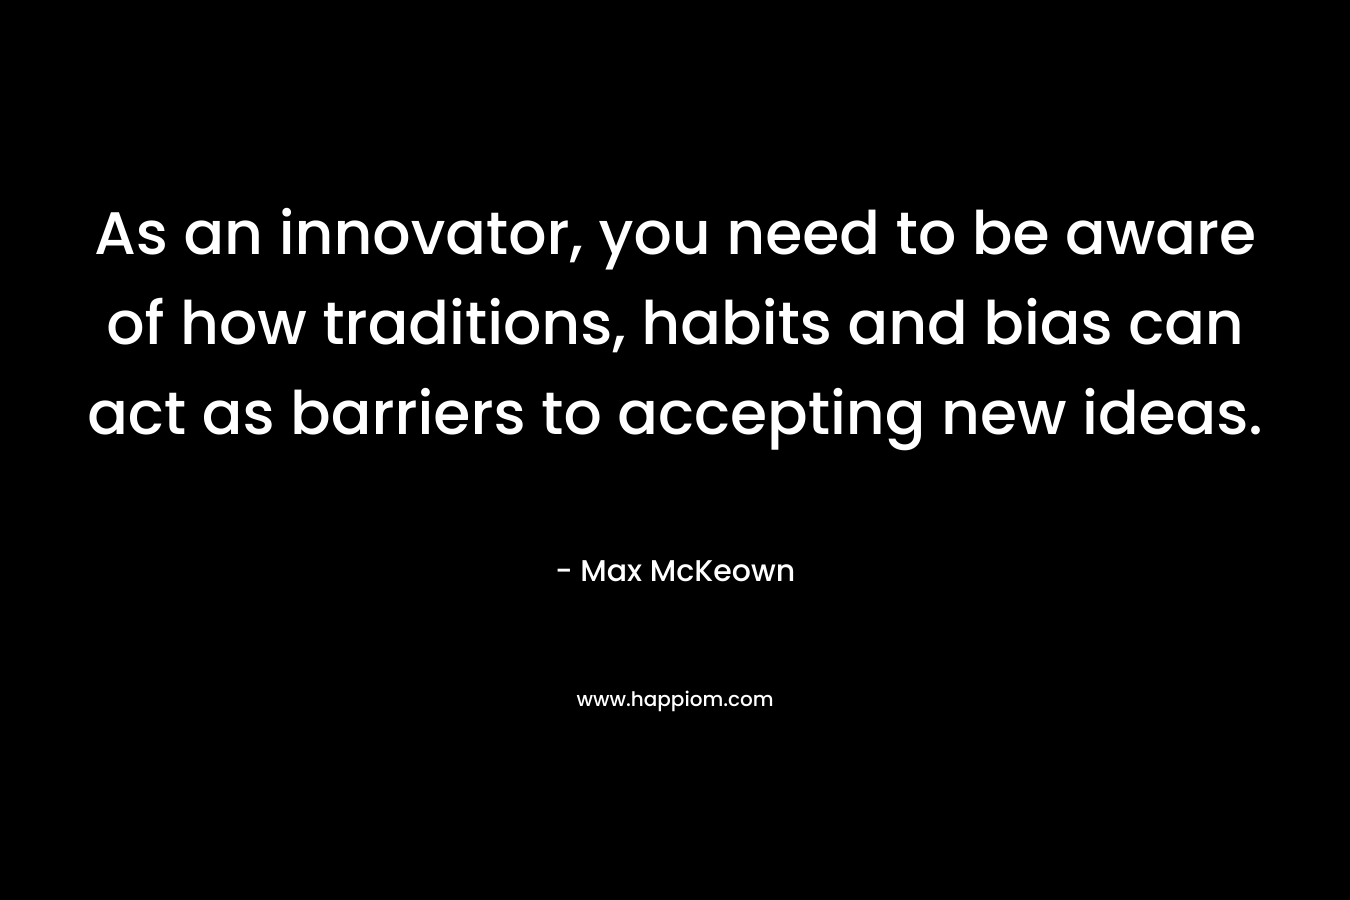 As an innovator, you need to be aware of how traditions, habits and bias can act as barriers to accepting new ideas.